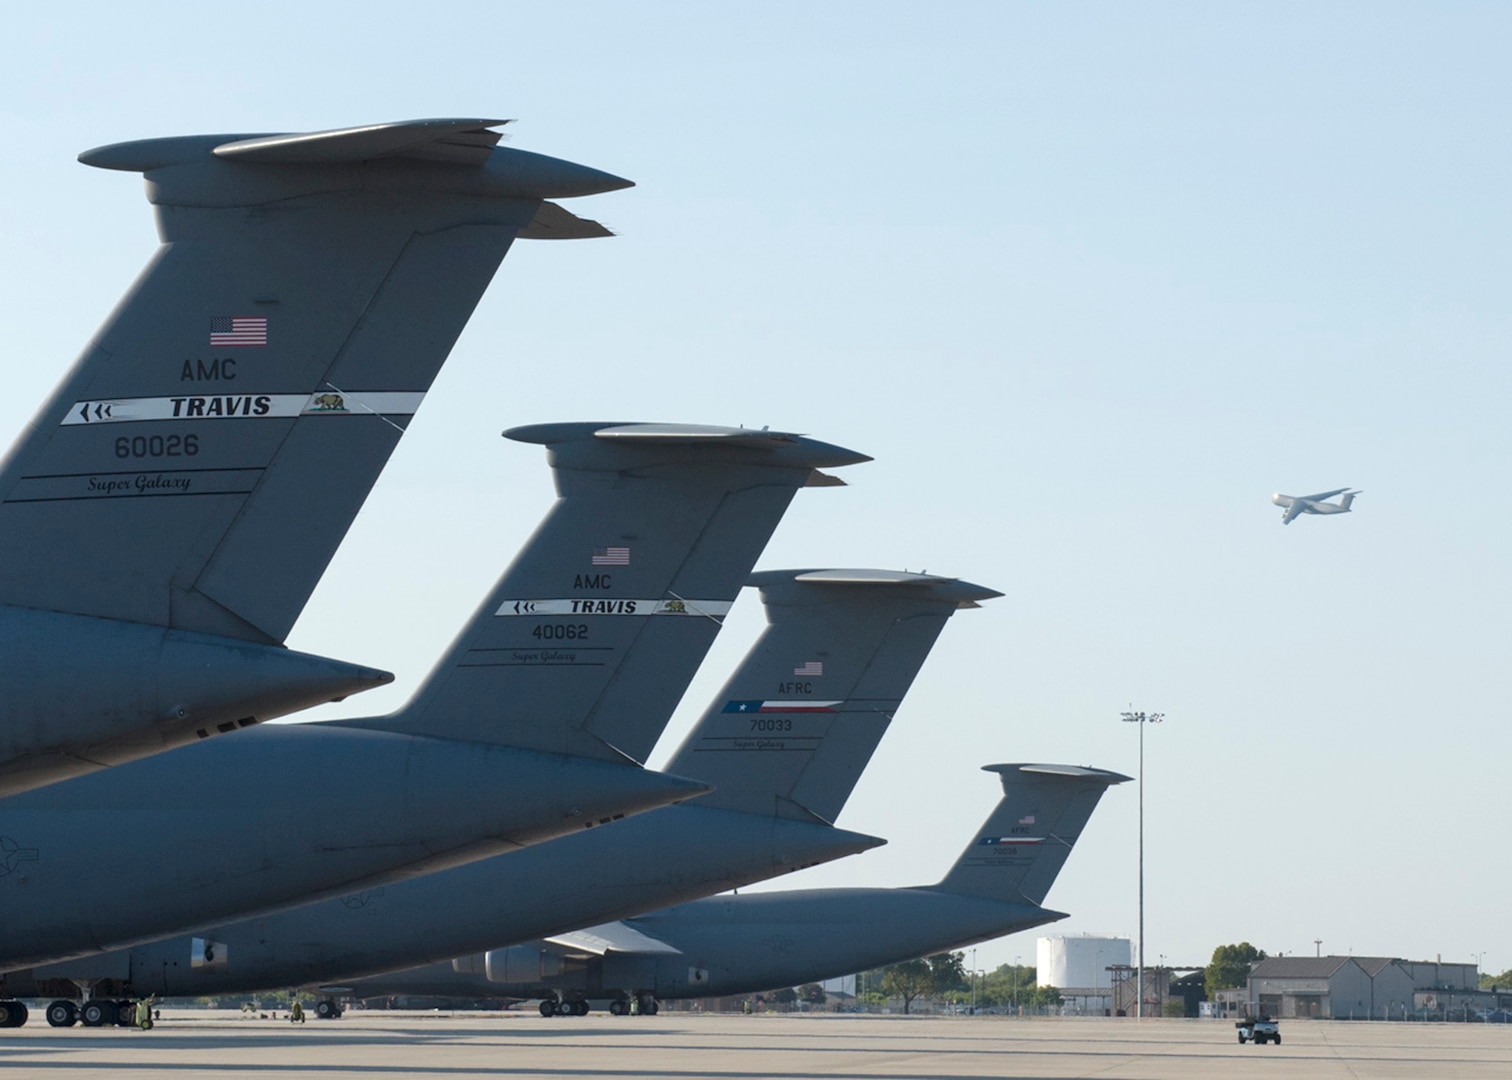 A Lockheed C-5 Galaxy takes aim to Houston, Texas, on August 30, 2017 transporting the 59th Medical Wing’s disaster relief teams. 70-members from the Air Force’s flagship medical wing were mobilized to provide medical attention to the 6 million residents of the greater Houston area, after the city suffered catastrophic flooding due to Hurricane Harvey.